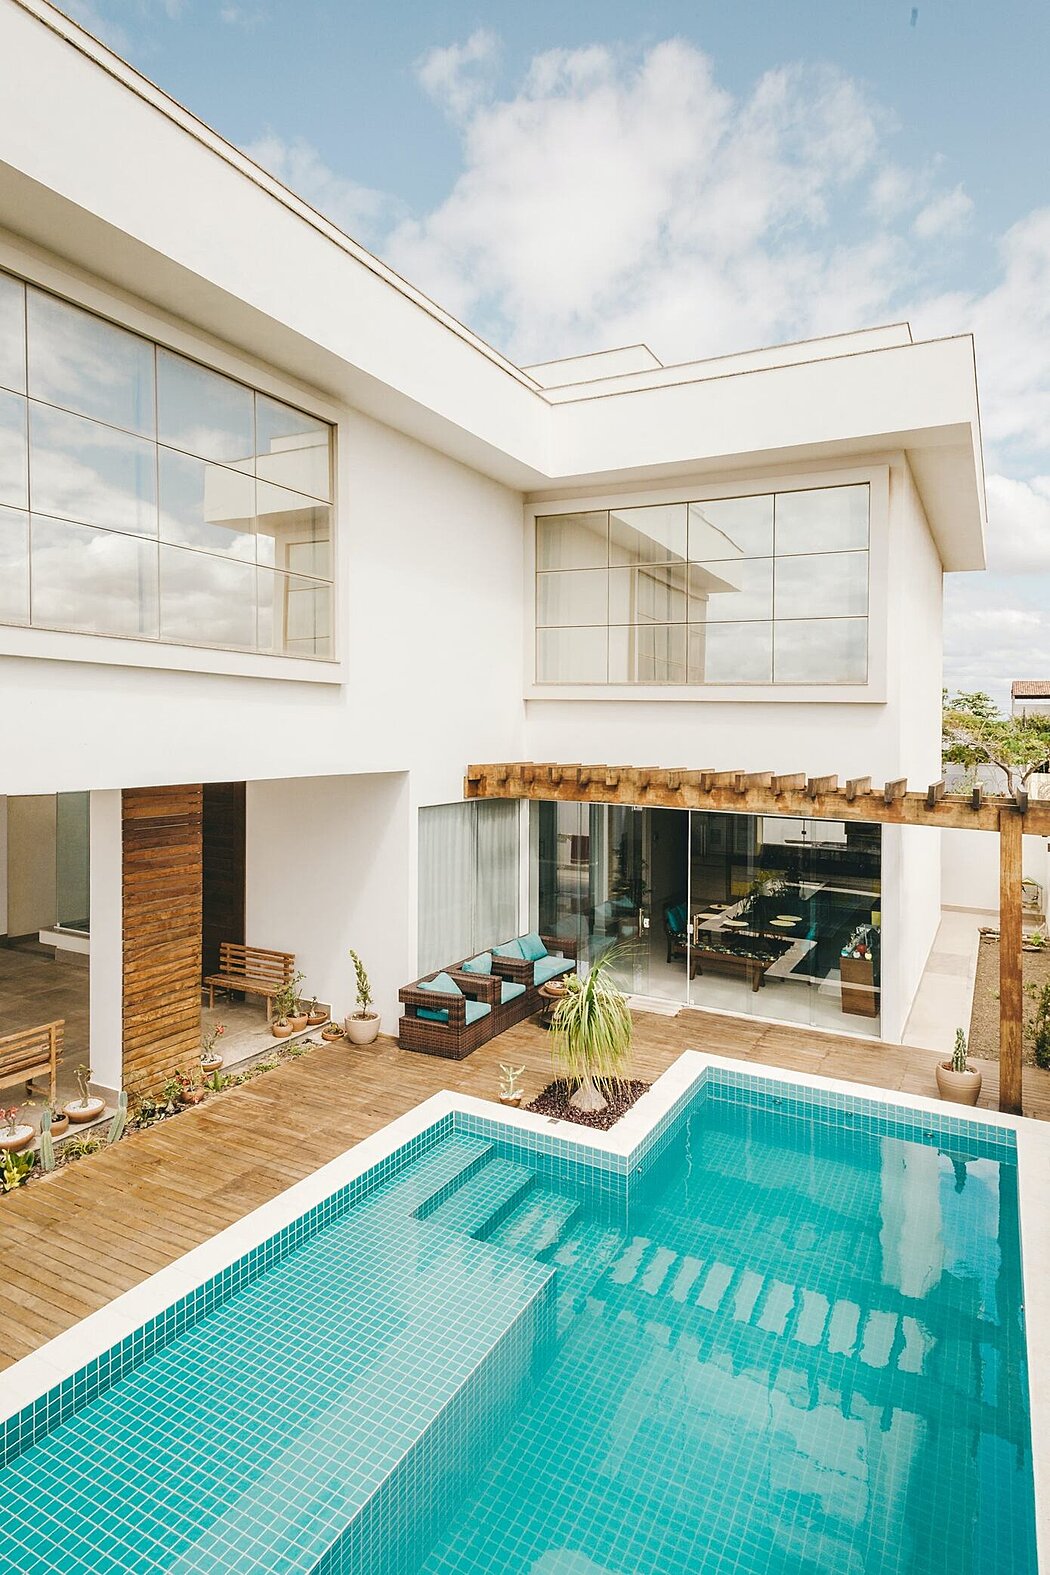 Modern two-story white house with large windows overlooking a blue swimming pool.